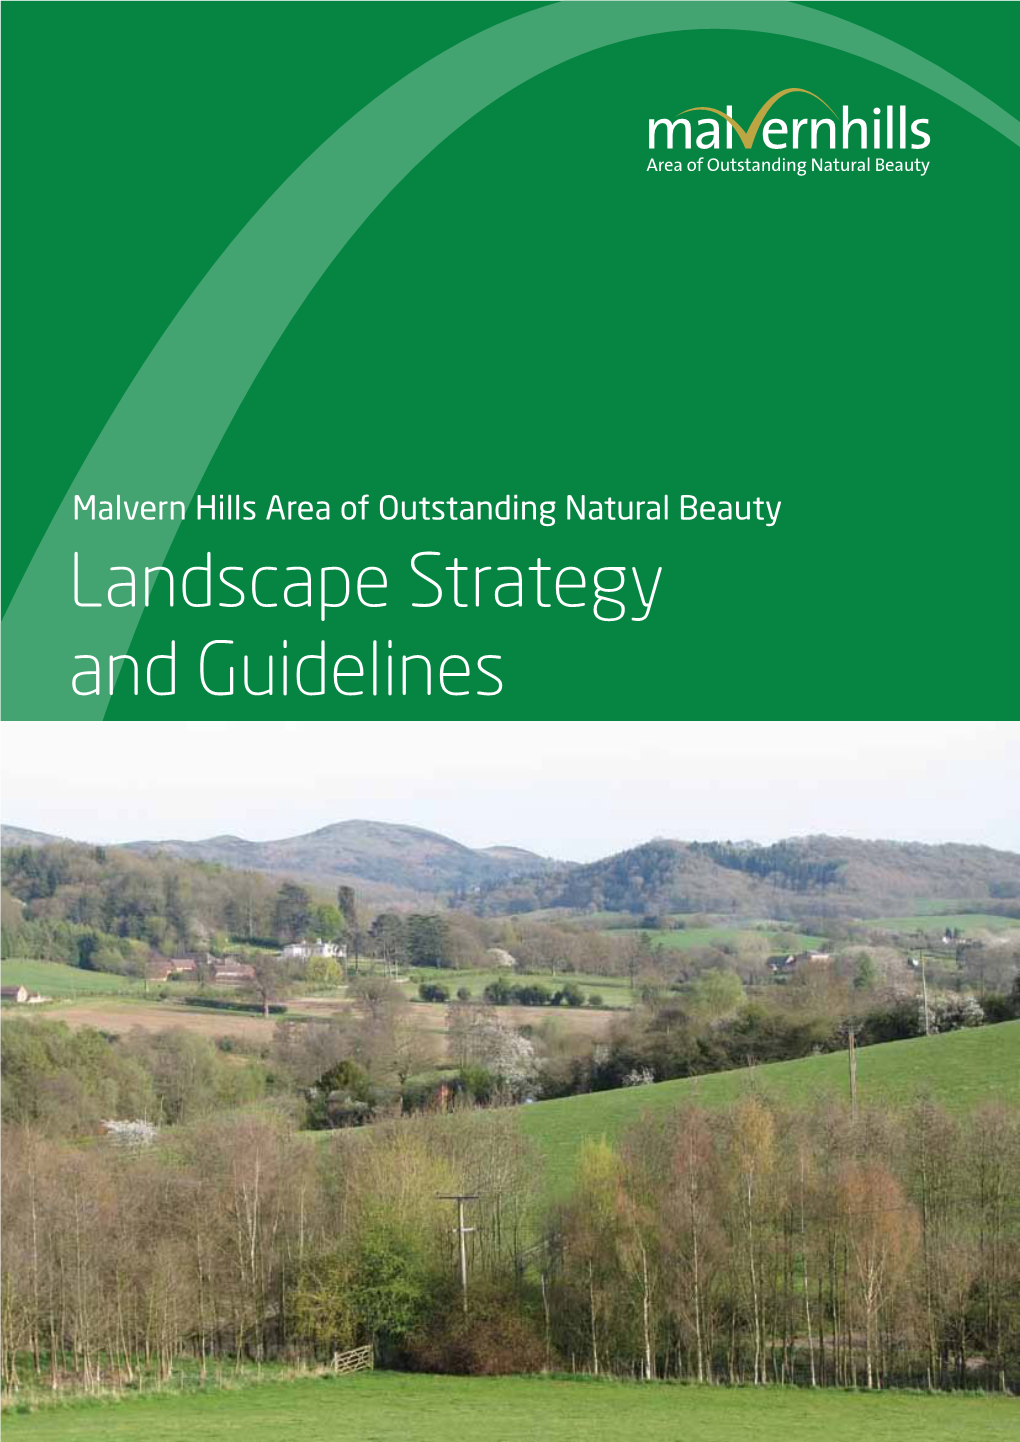 Download the Landscape Strategy and Guidelines